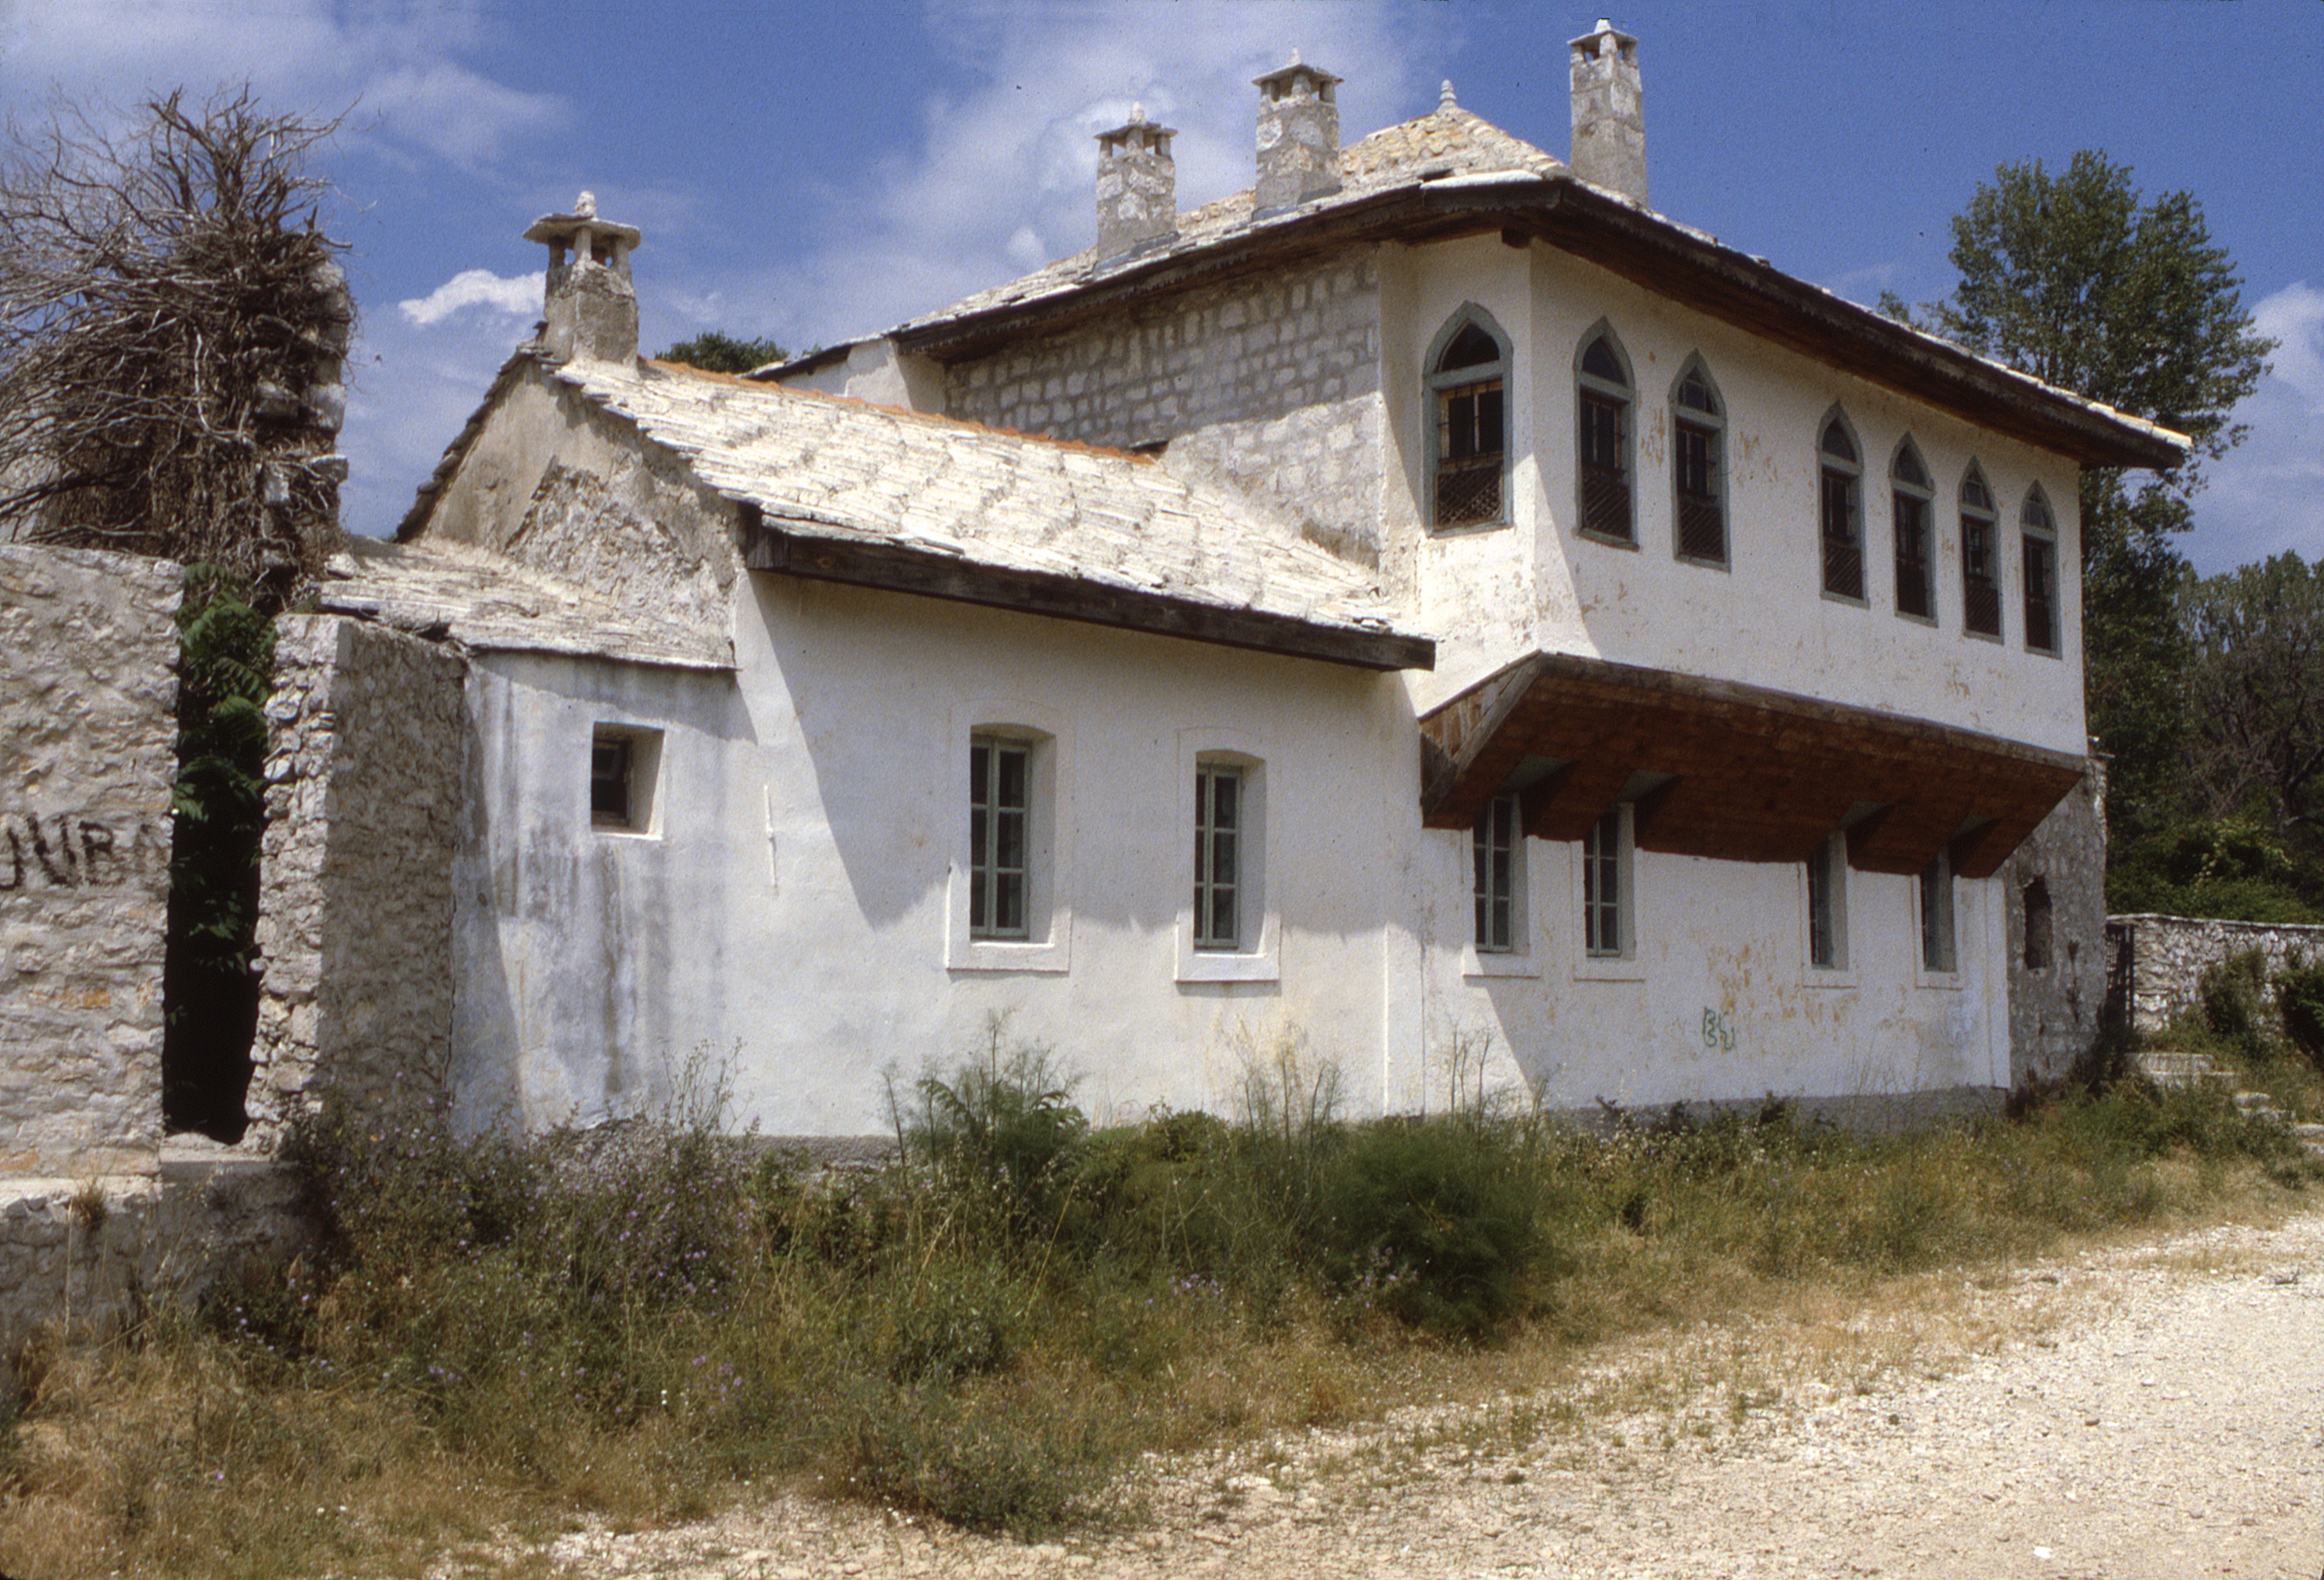 <p>The Resulbegović family lived in the ground floor spaces during the winter and the upper level during the milder months. The lower walls are stone covered with a plaster and the upper walls of wooden braced framing filled with lighter soft brick and covered with plaster. The exposed stone extension in the distance was a storeroom that provided a terrace above. The south projecting facade (doksat) of the dwelling faced the Trebišnjica river. The house forms the southern edge of the family (haremluk) courtyard that also contained a konak for guests.</p>